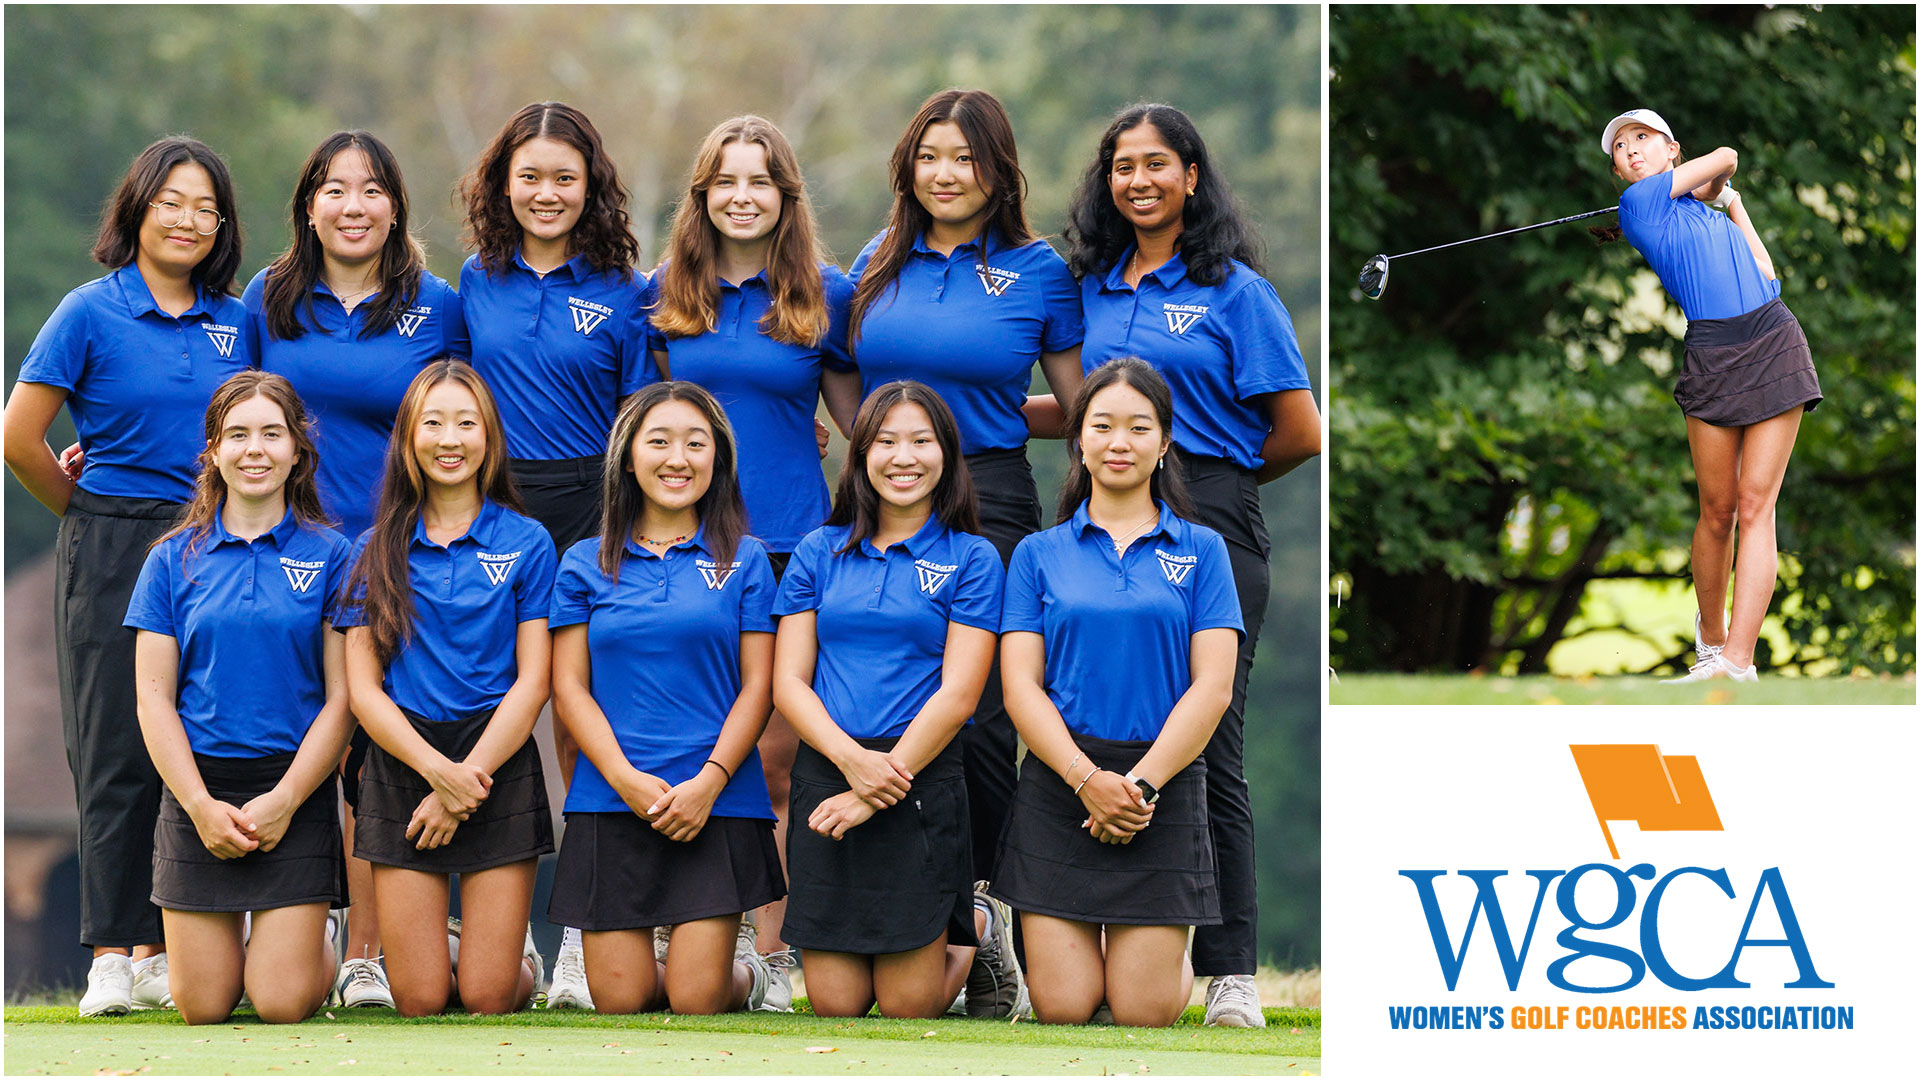 Wellesley Golf was ranked No. 13 in the latest WGCA poll (Frank Poulin)